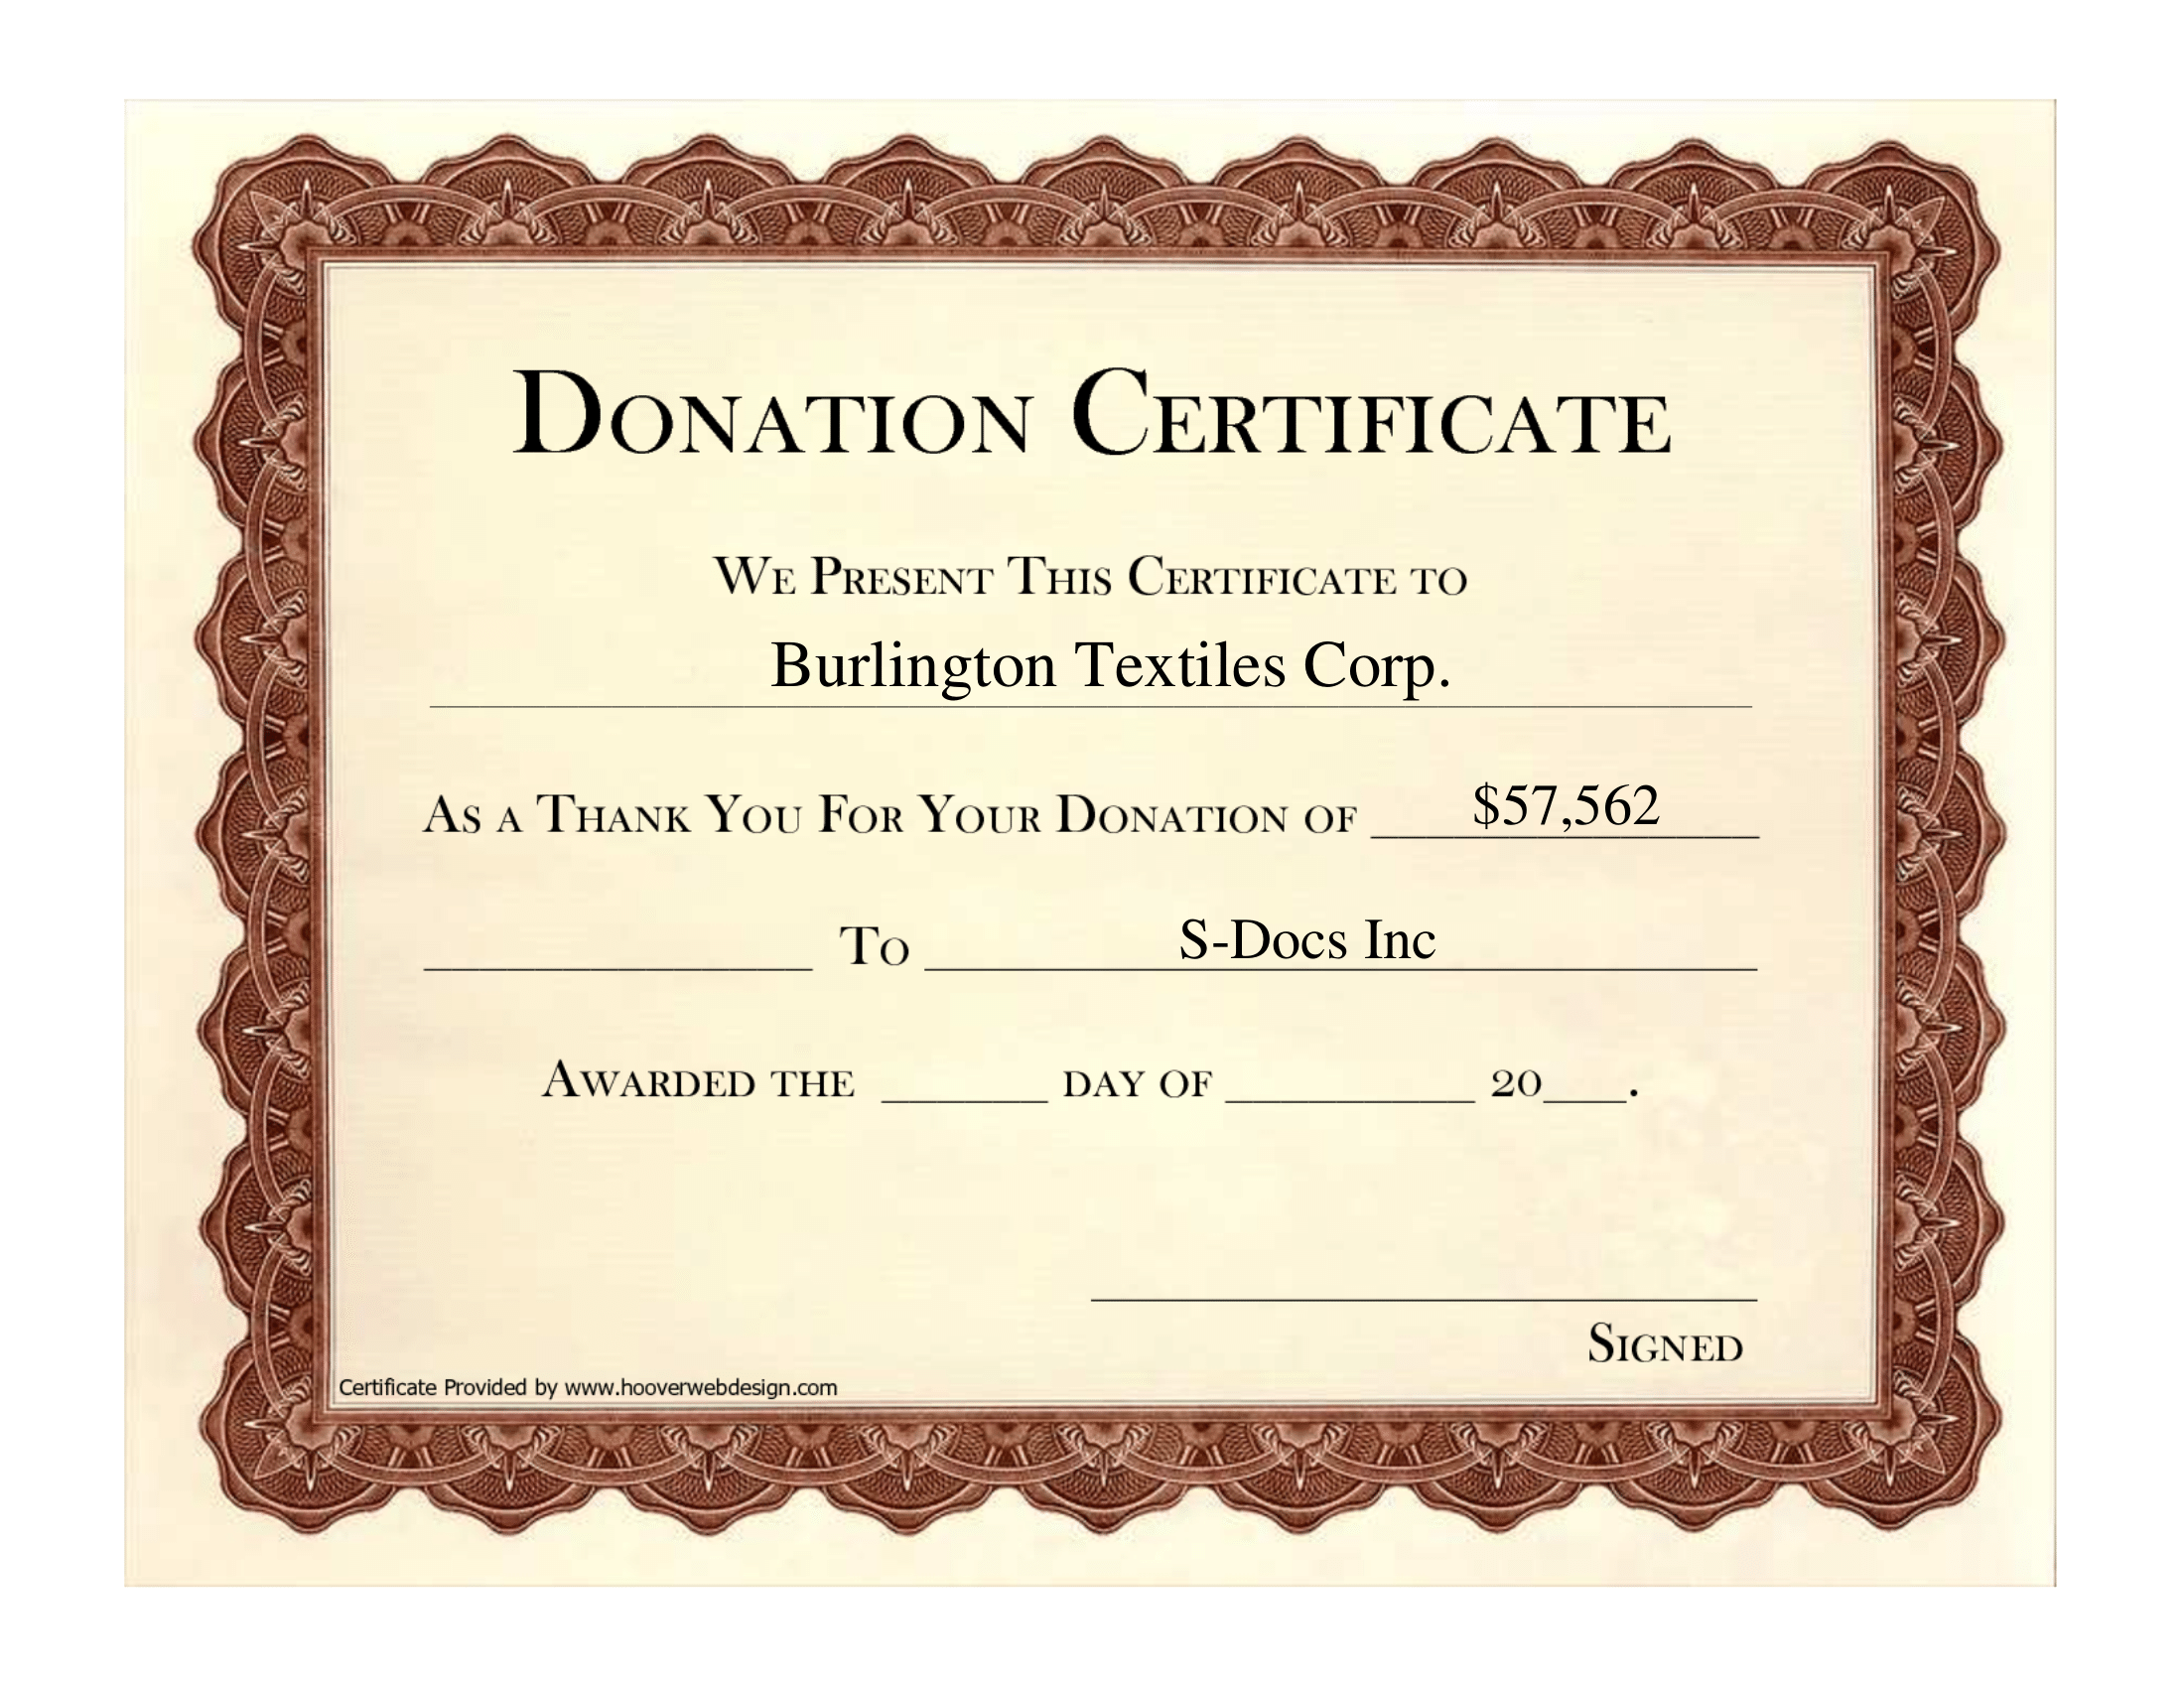 Certificate Donation - S-Docs for Salesforce